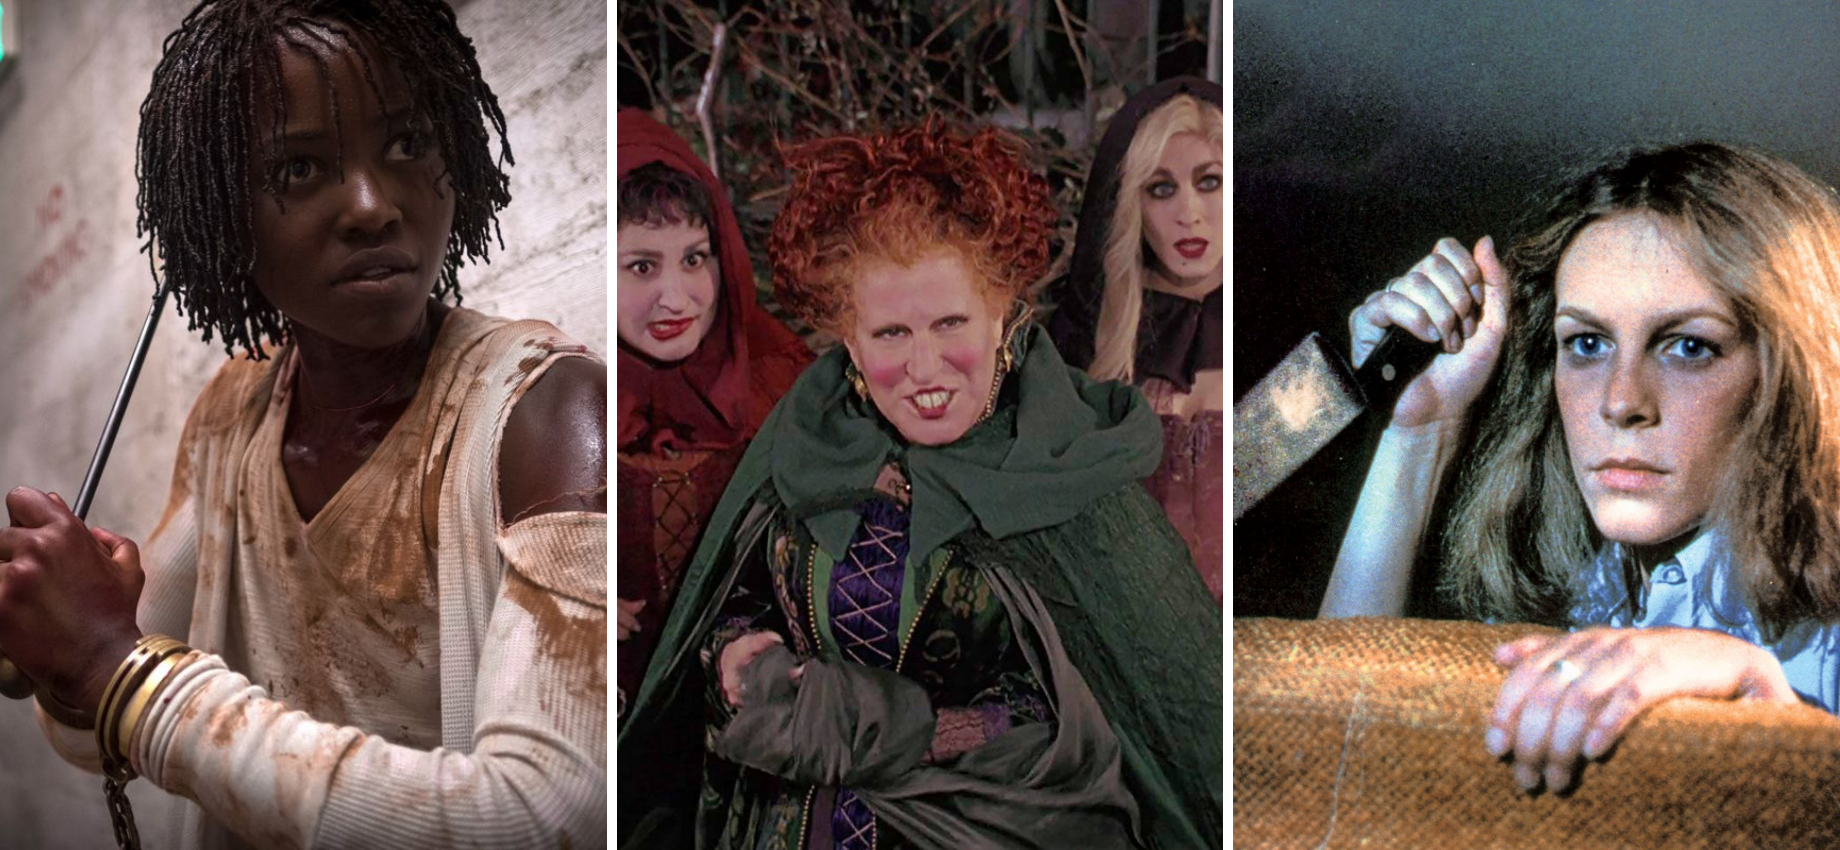 Our Favorite Halloween Movies